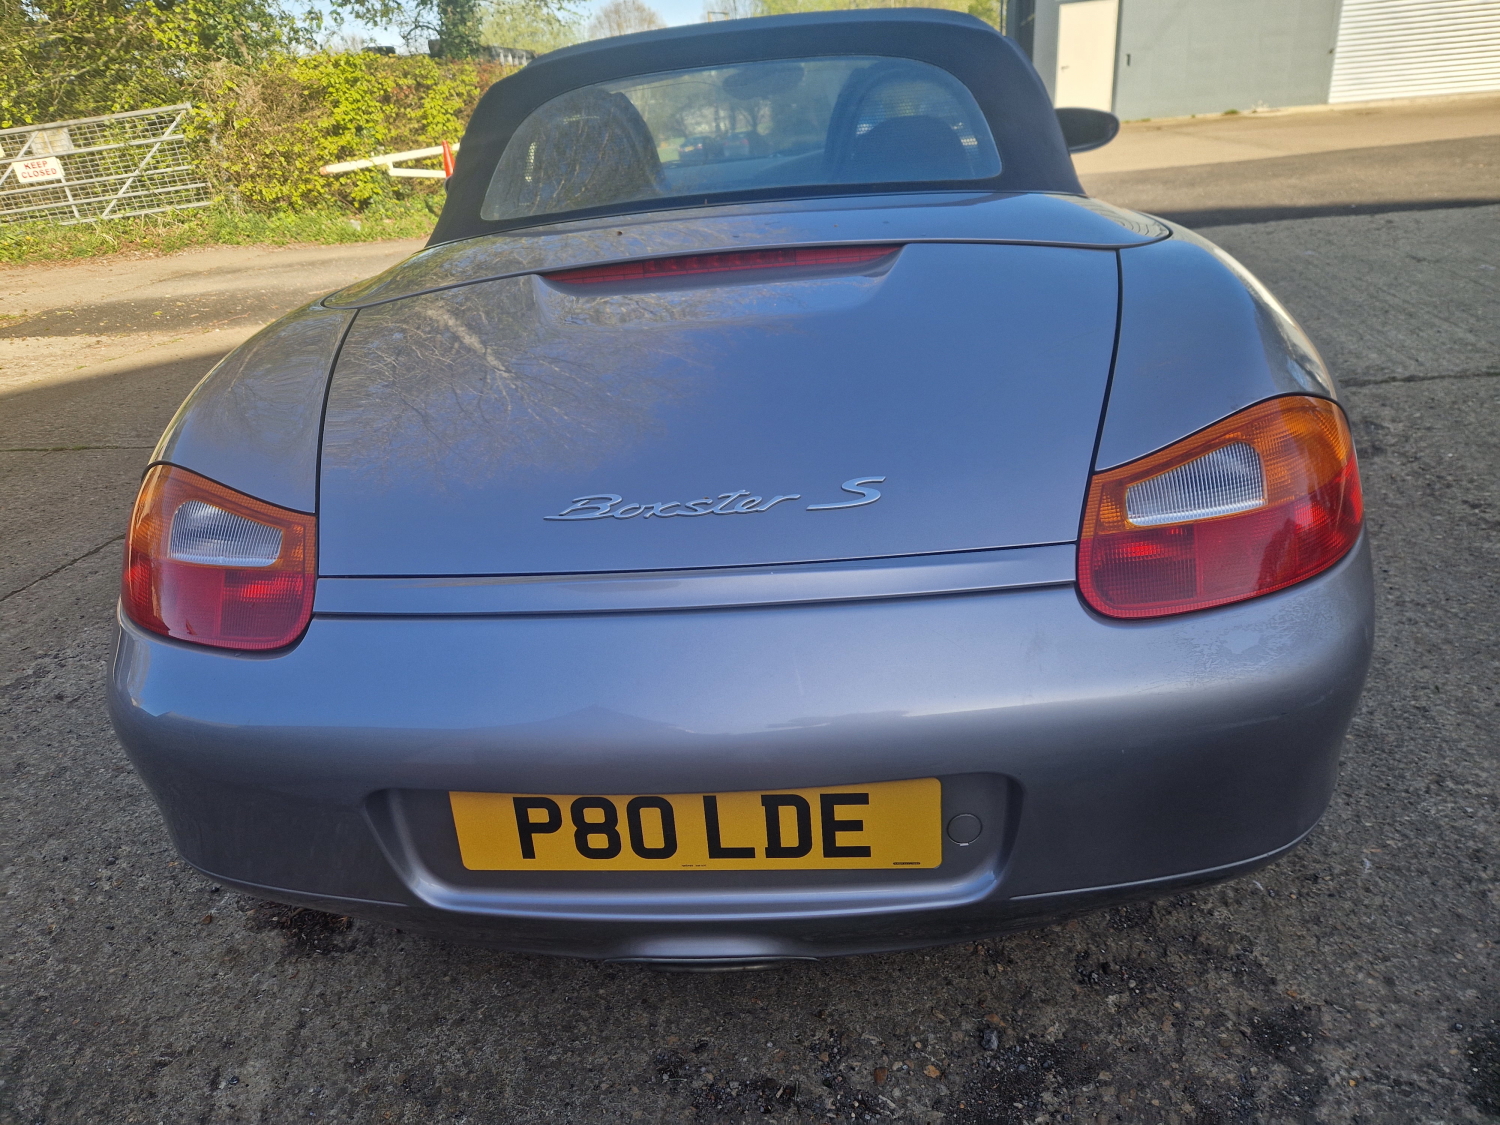 PORSCHE BOXTER CONVERTIBLE 2002. 129,000 MILES. NEW MOT. MUCH SERVICE HISTORY, OWNERS MANUAL. GOOD - Image 7 of 7